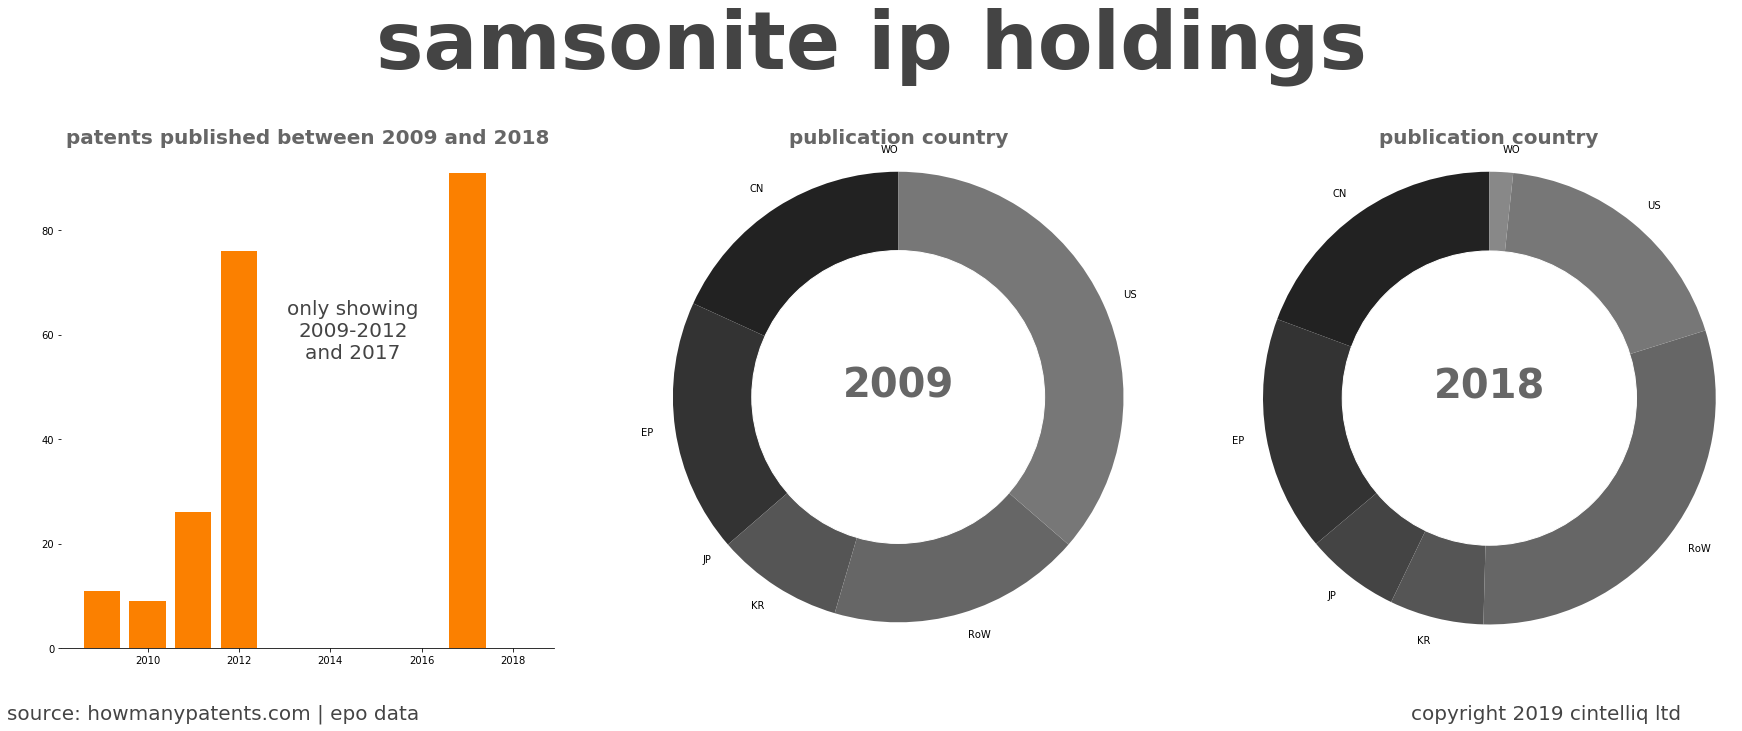 summary of patents for Samsonite Ip Holdings